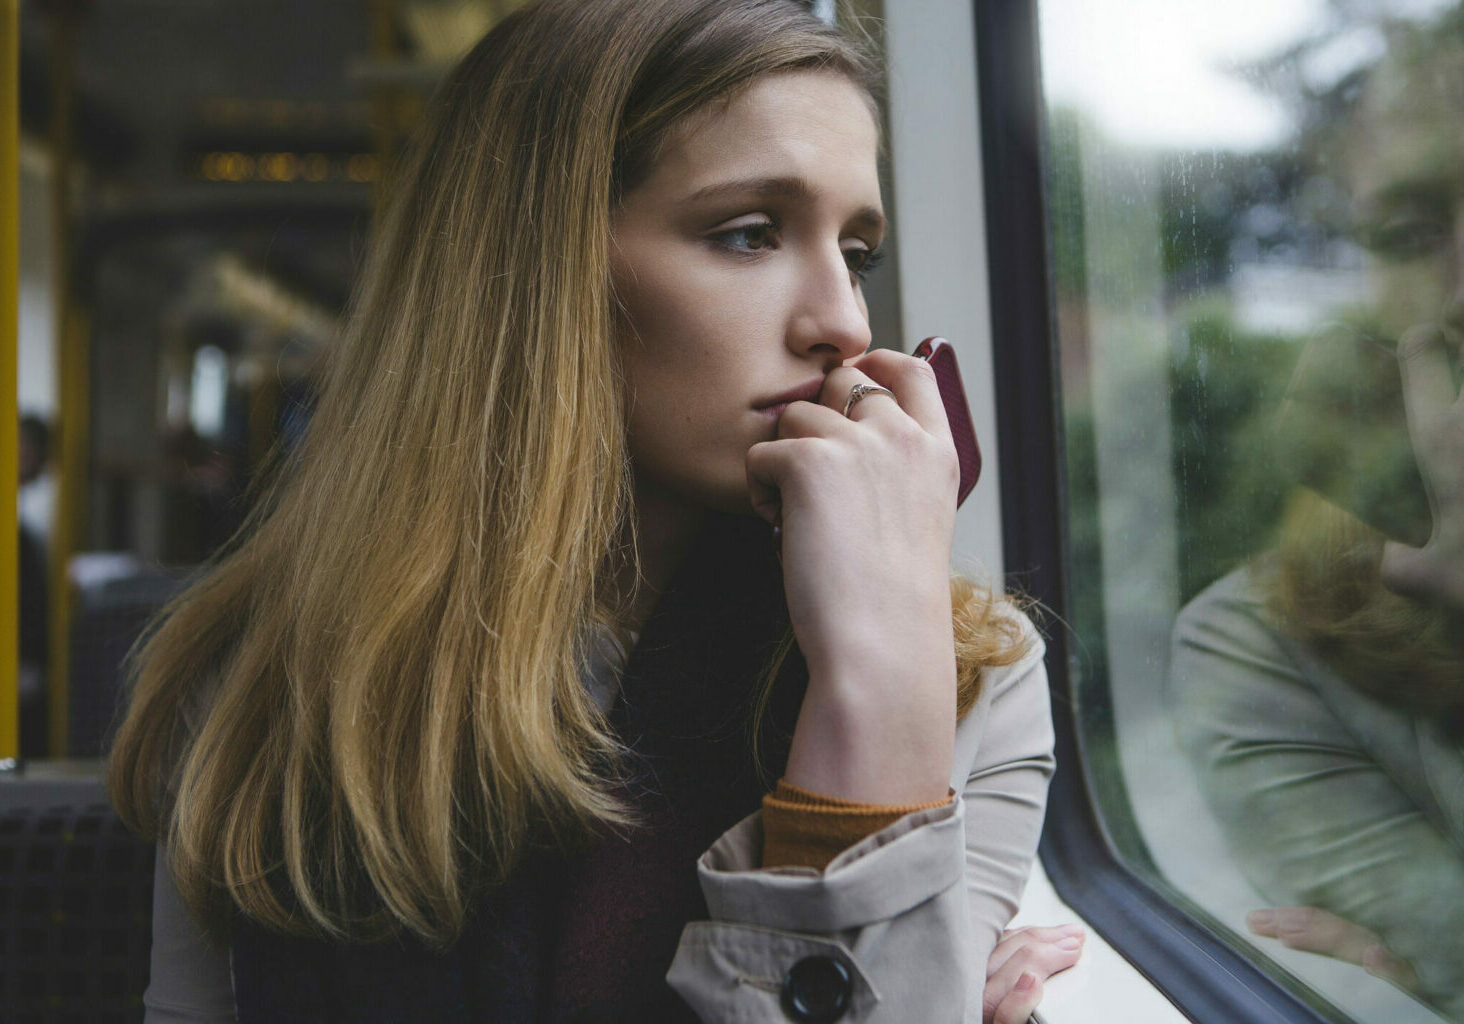 Young woman looking very upset as she sits on a train, looking out of the window. She is holding her phone in her hand up to her mouth.